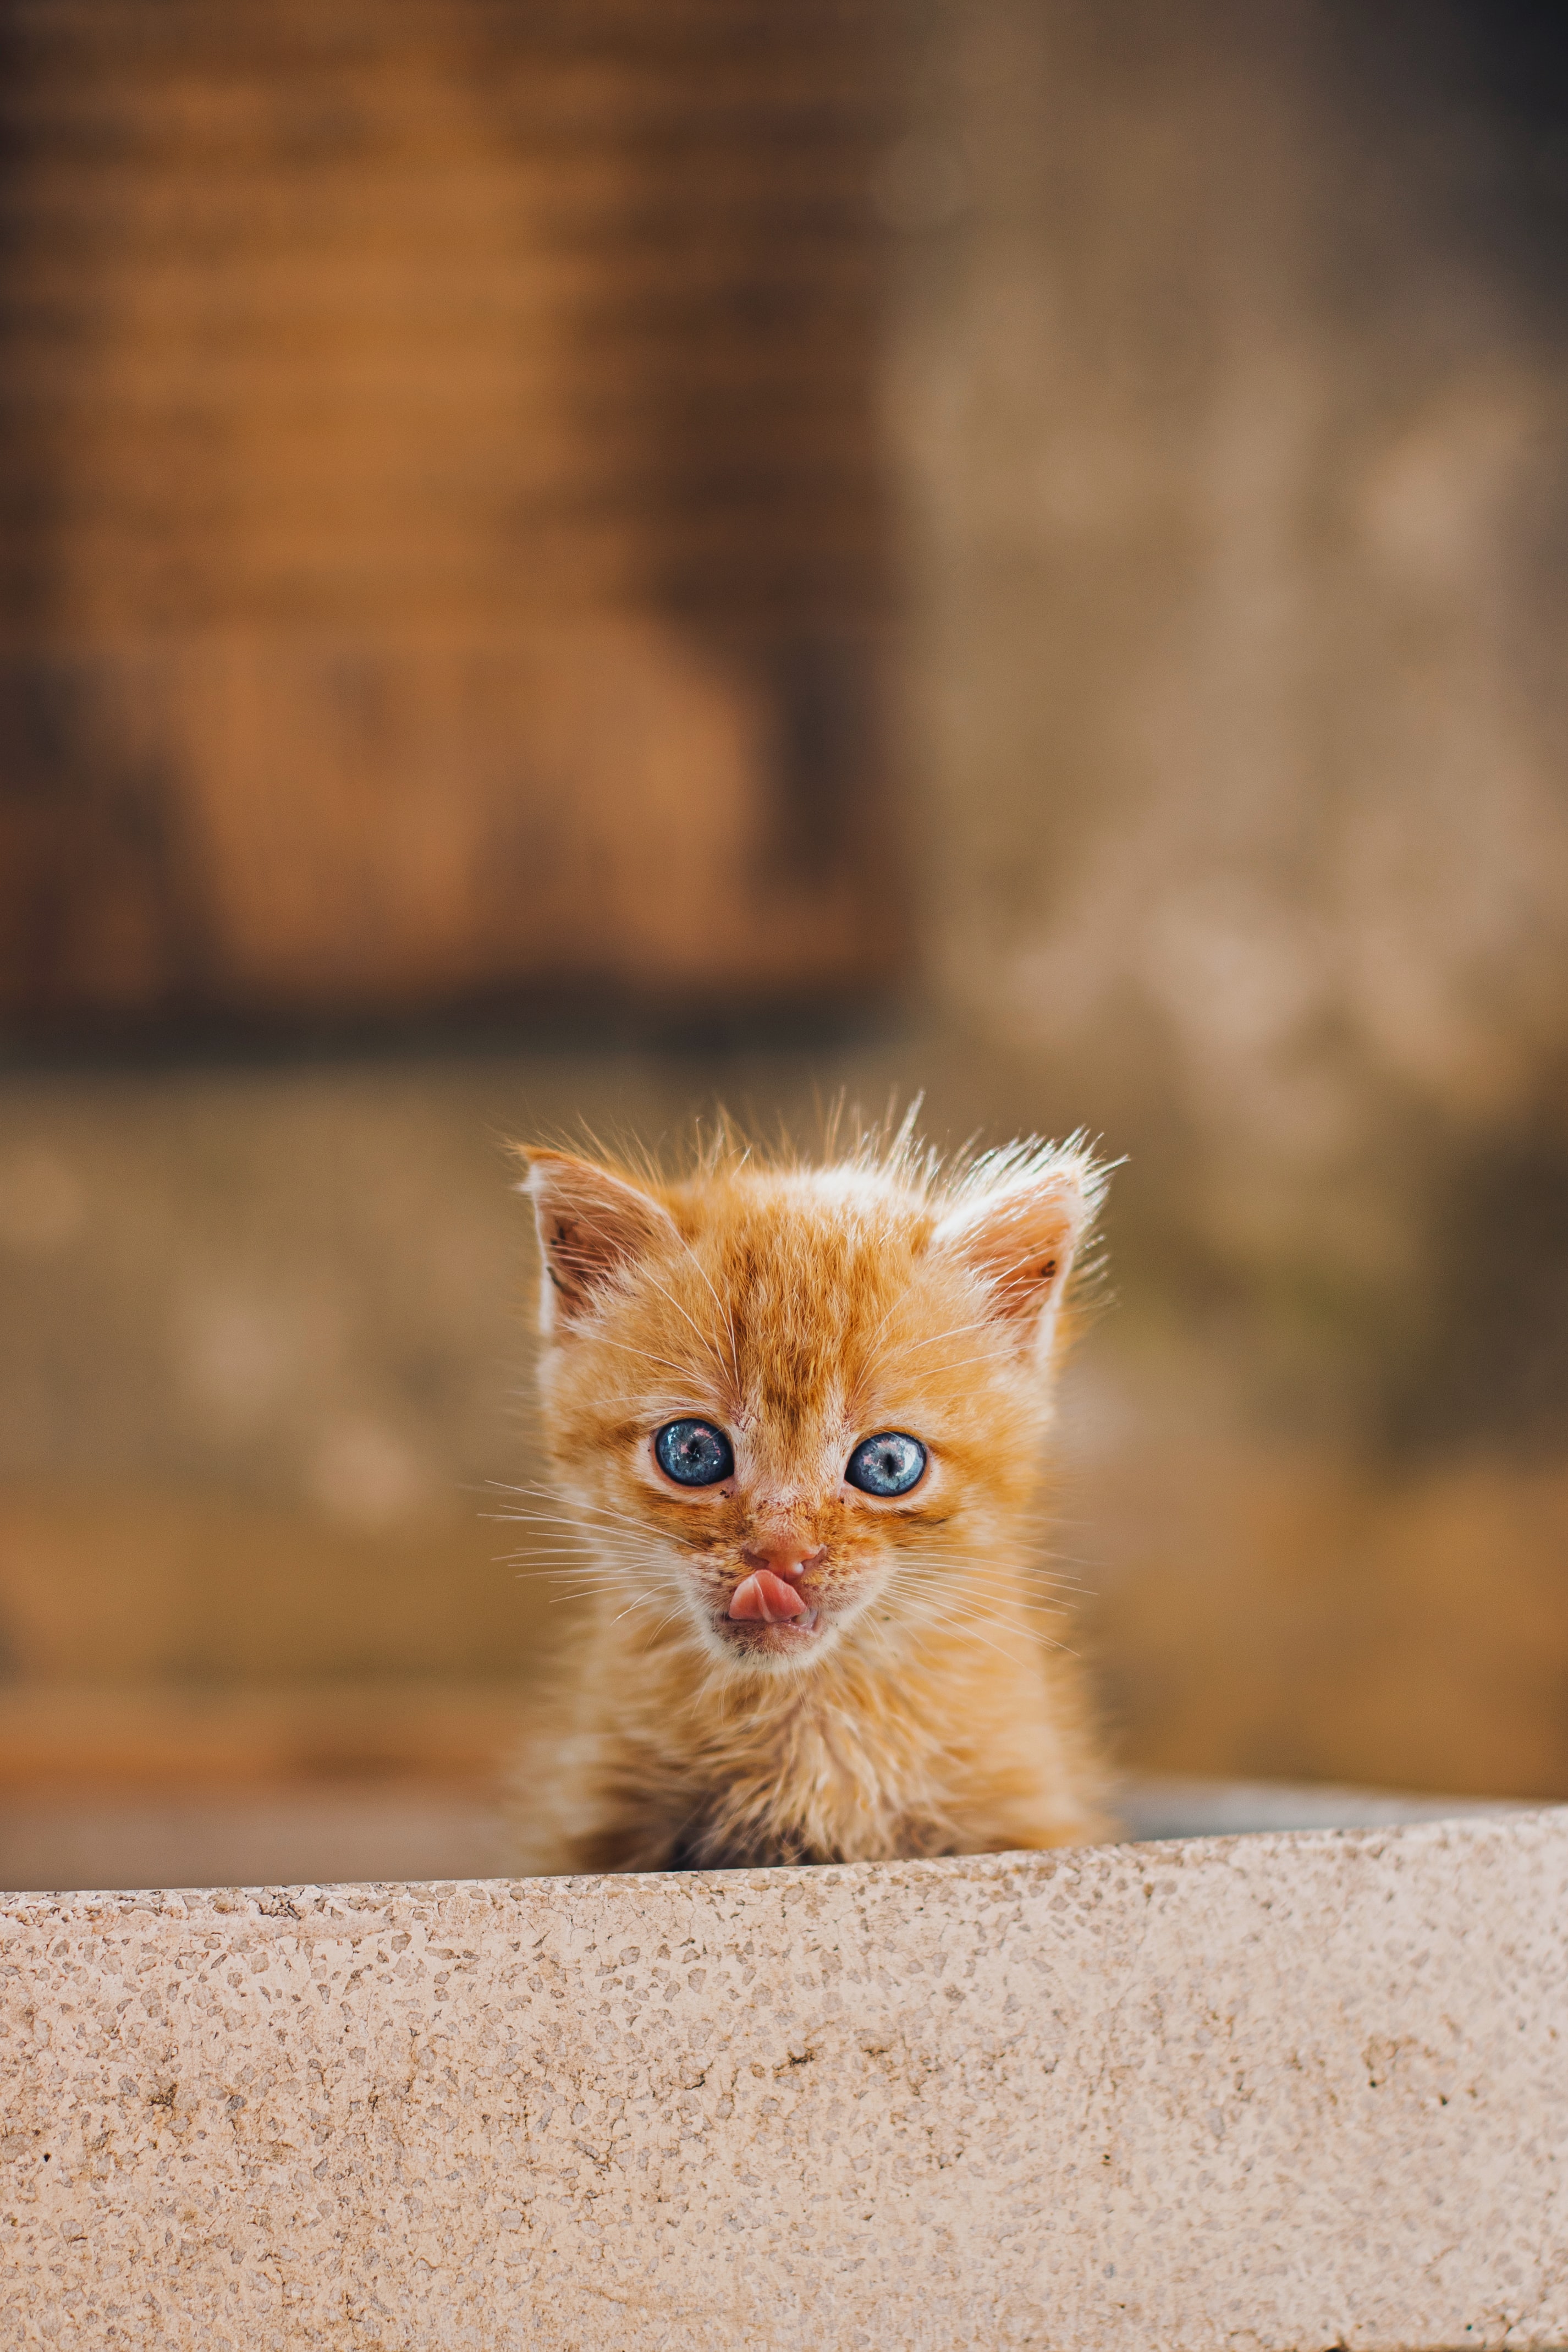 sweetheart, animals, red, kitty, kitten, nice, protruding tongue, tongue stuck out, redhead phone wallpaper